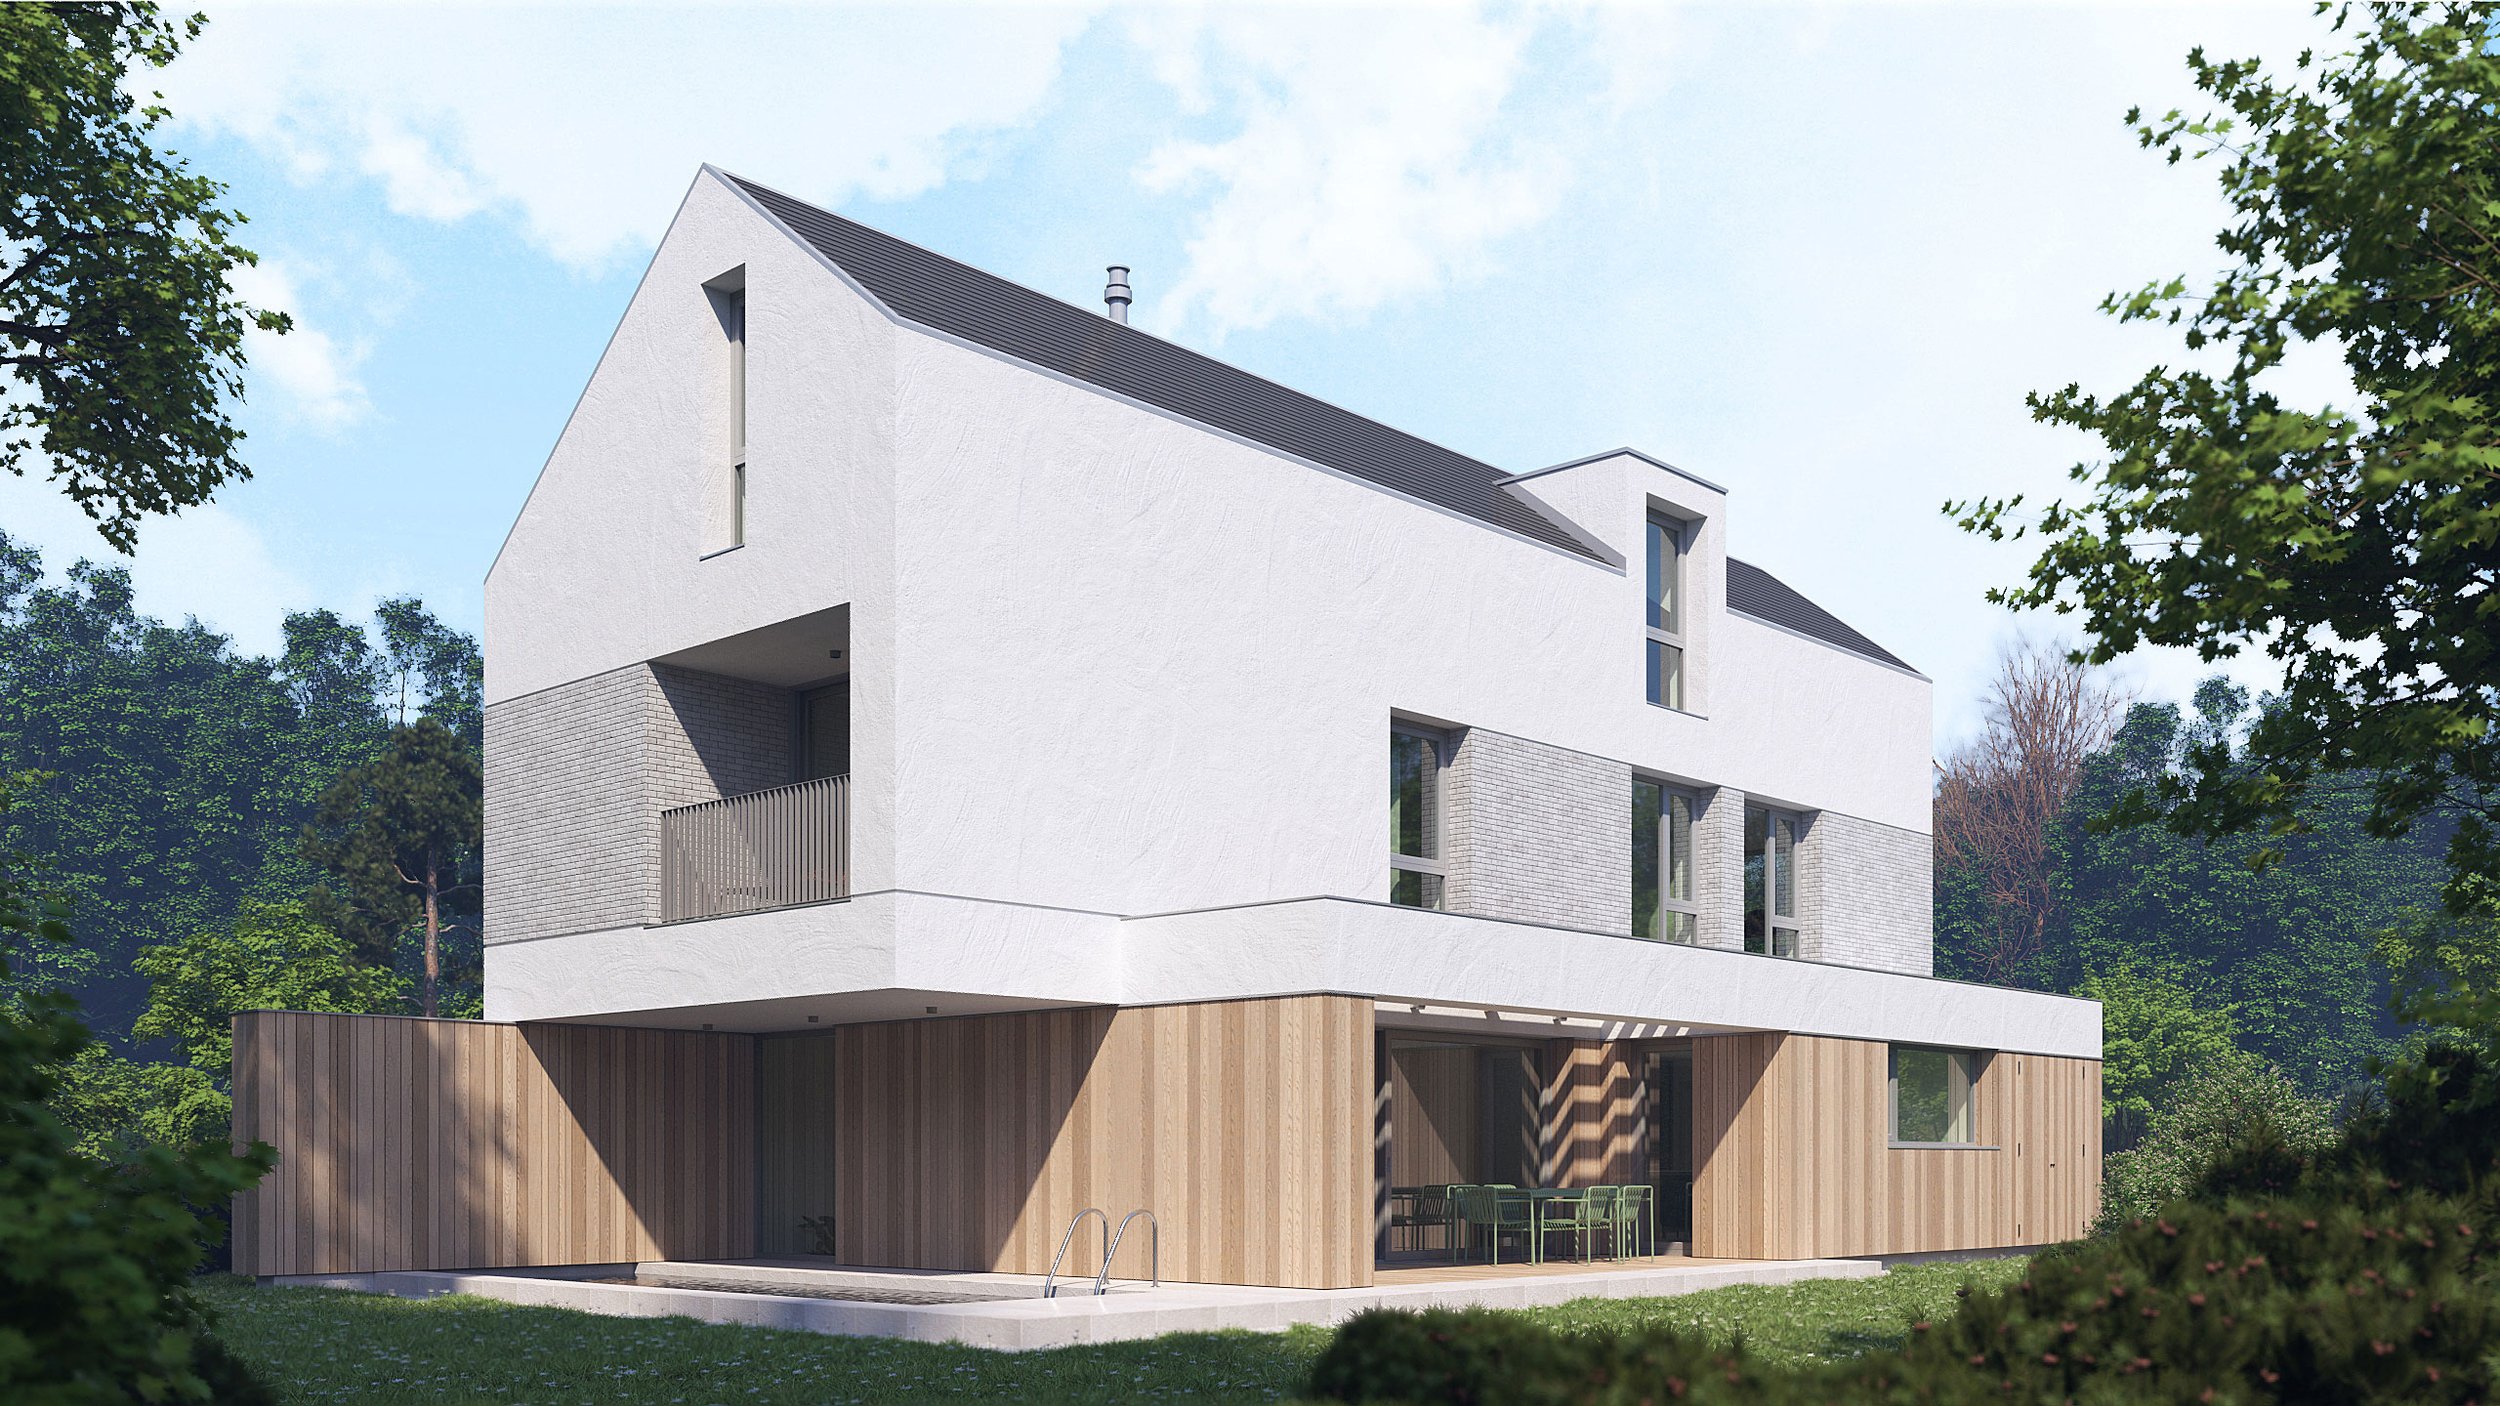 Breaking-Clouds_OA House_Architectural-Rendering_F.jpg